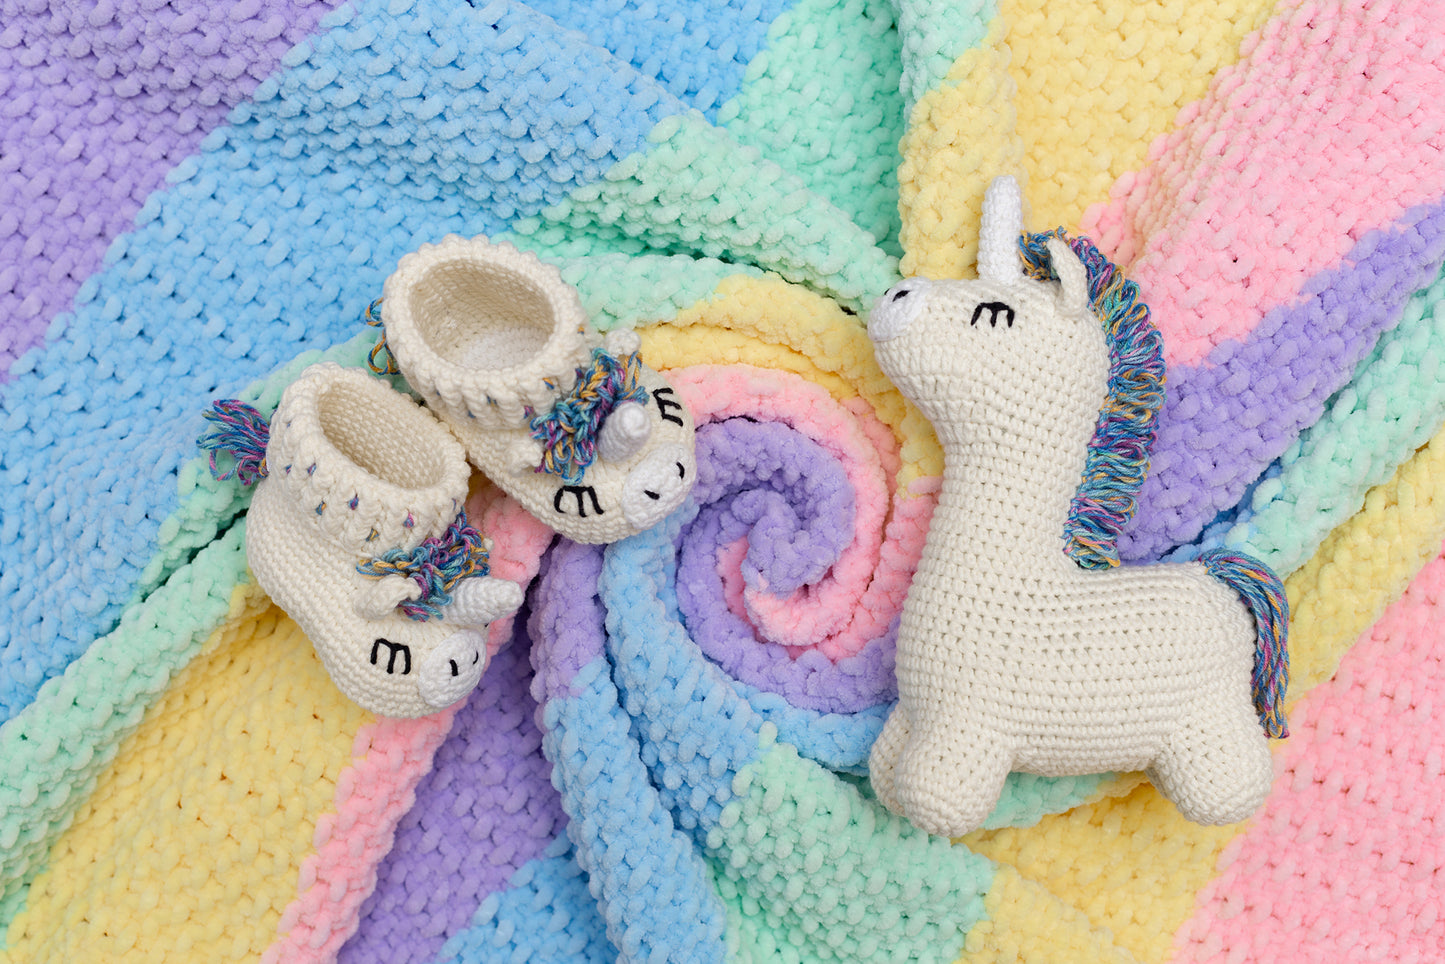 Baby shower gift set Unicorn toy, booties and blanket pregnancy gift box